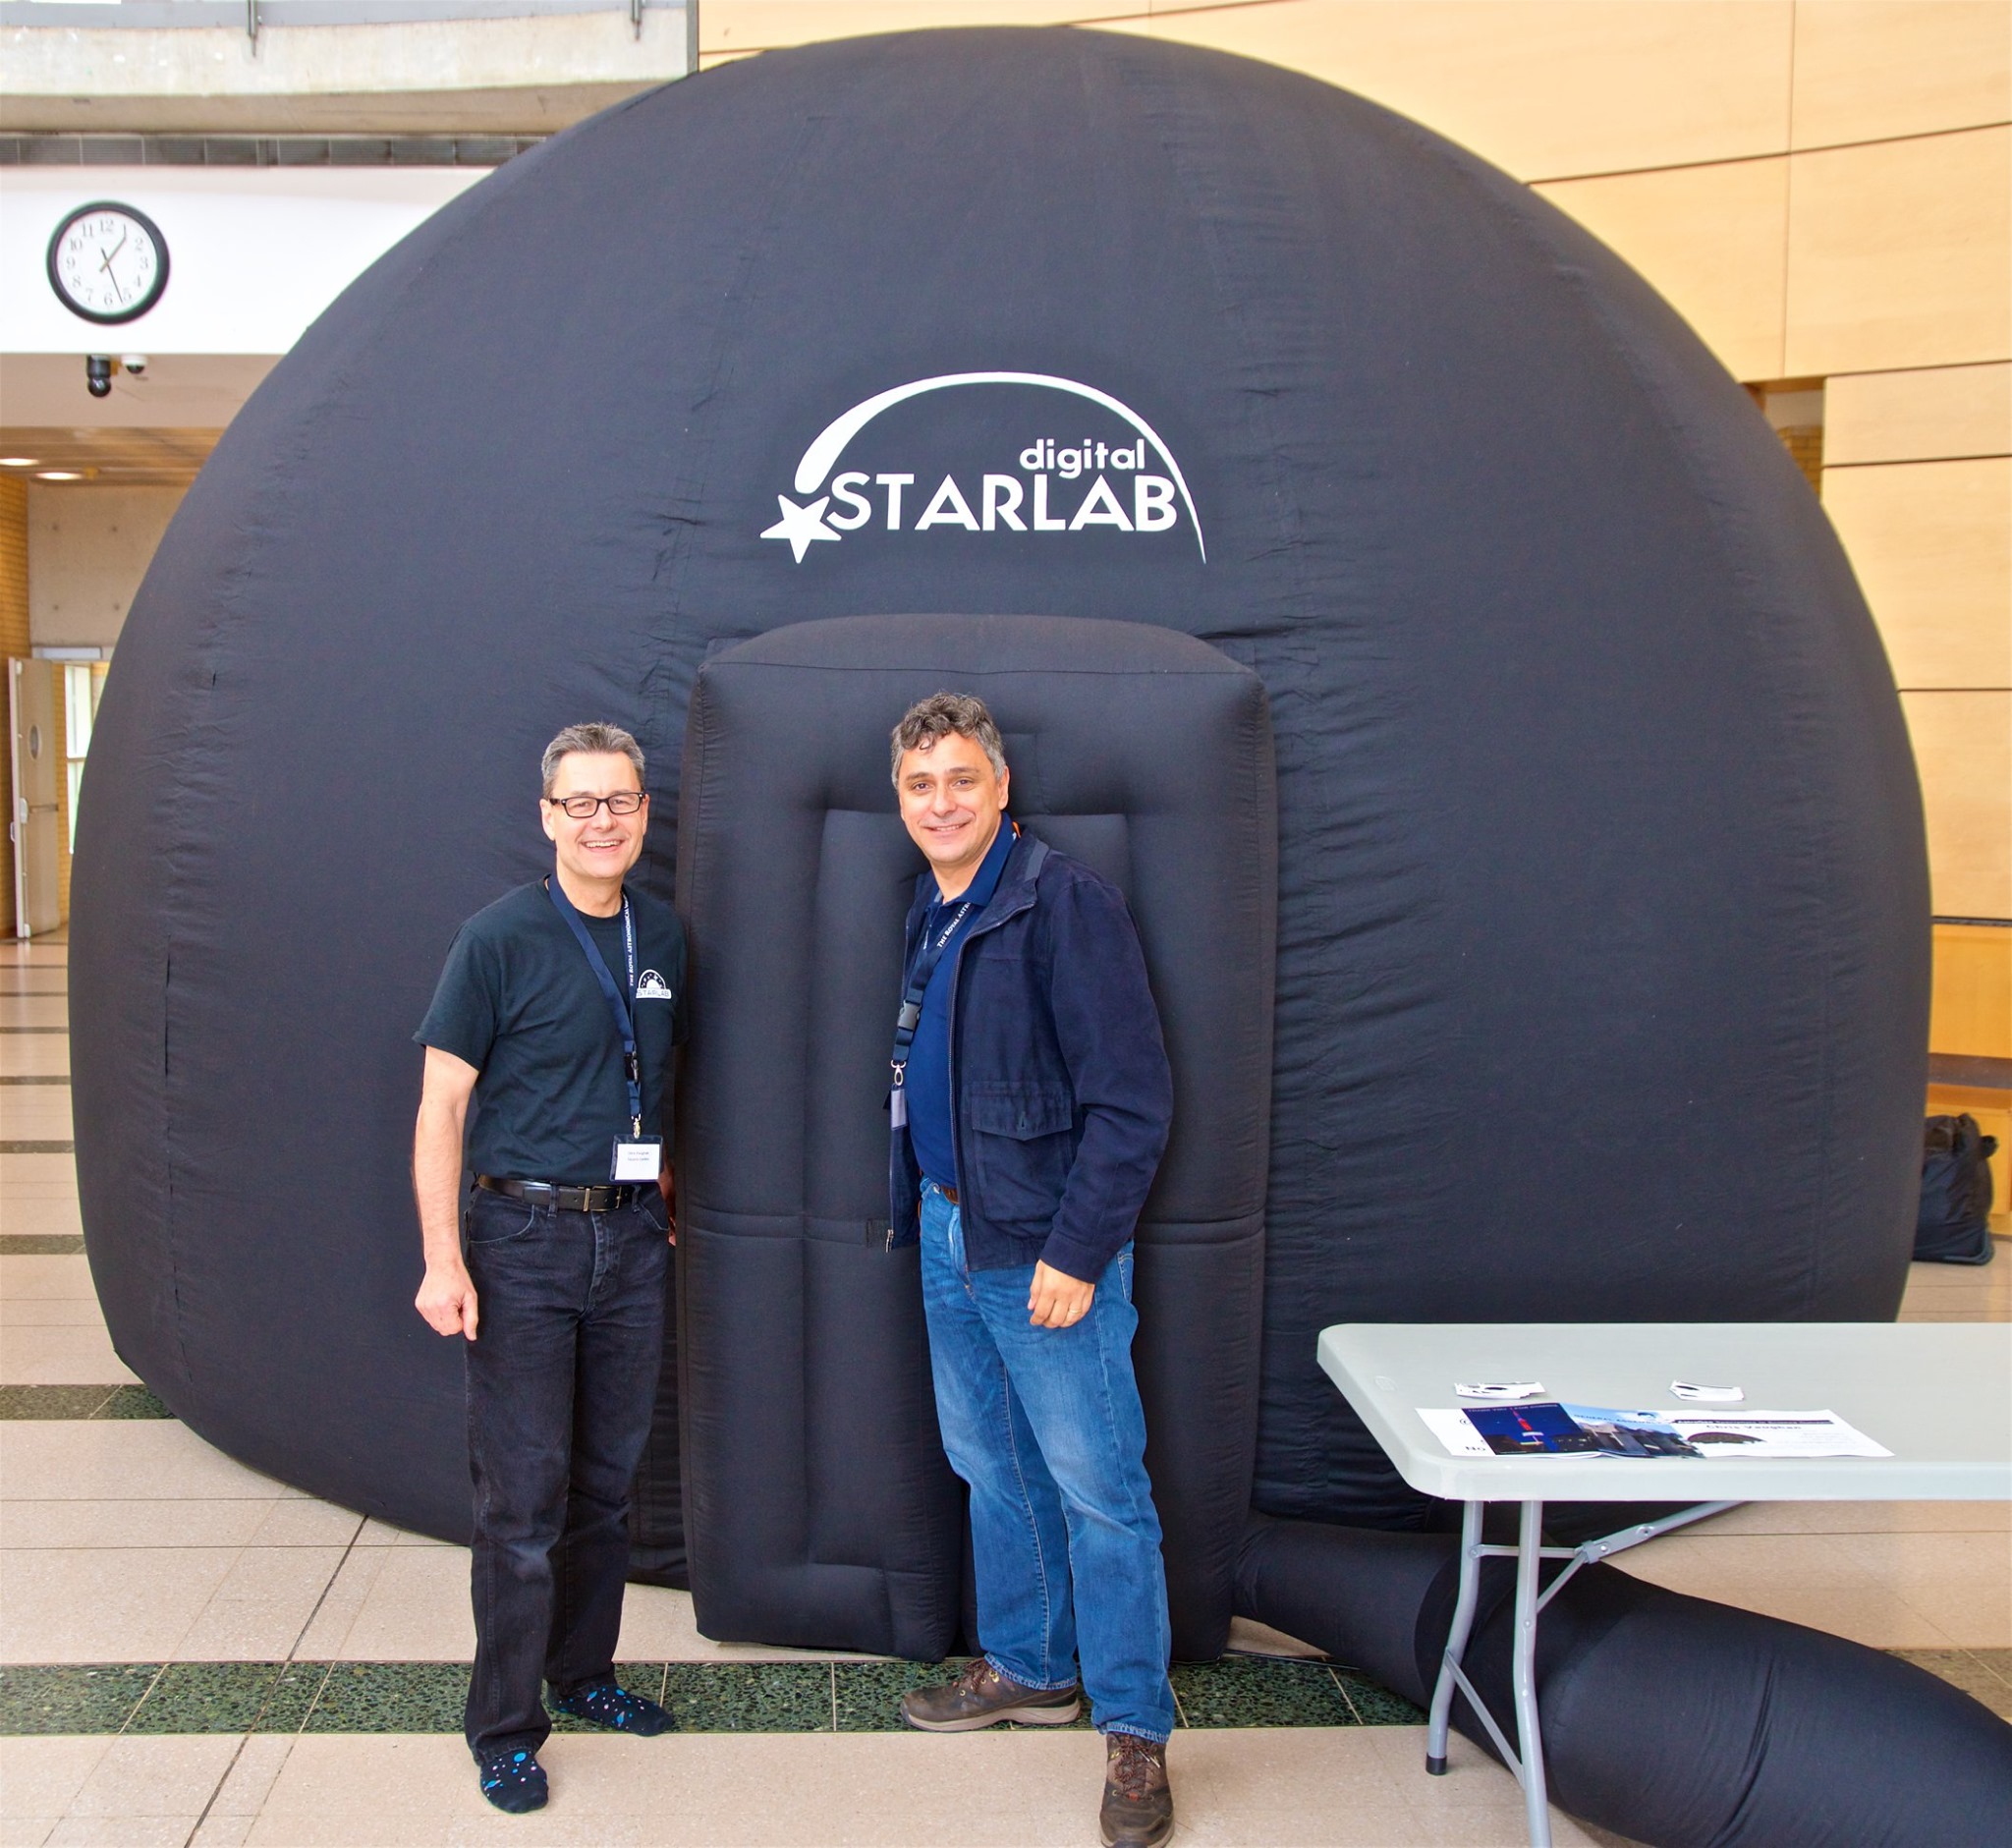 Chris and Claudio with starlab at GA 2019